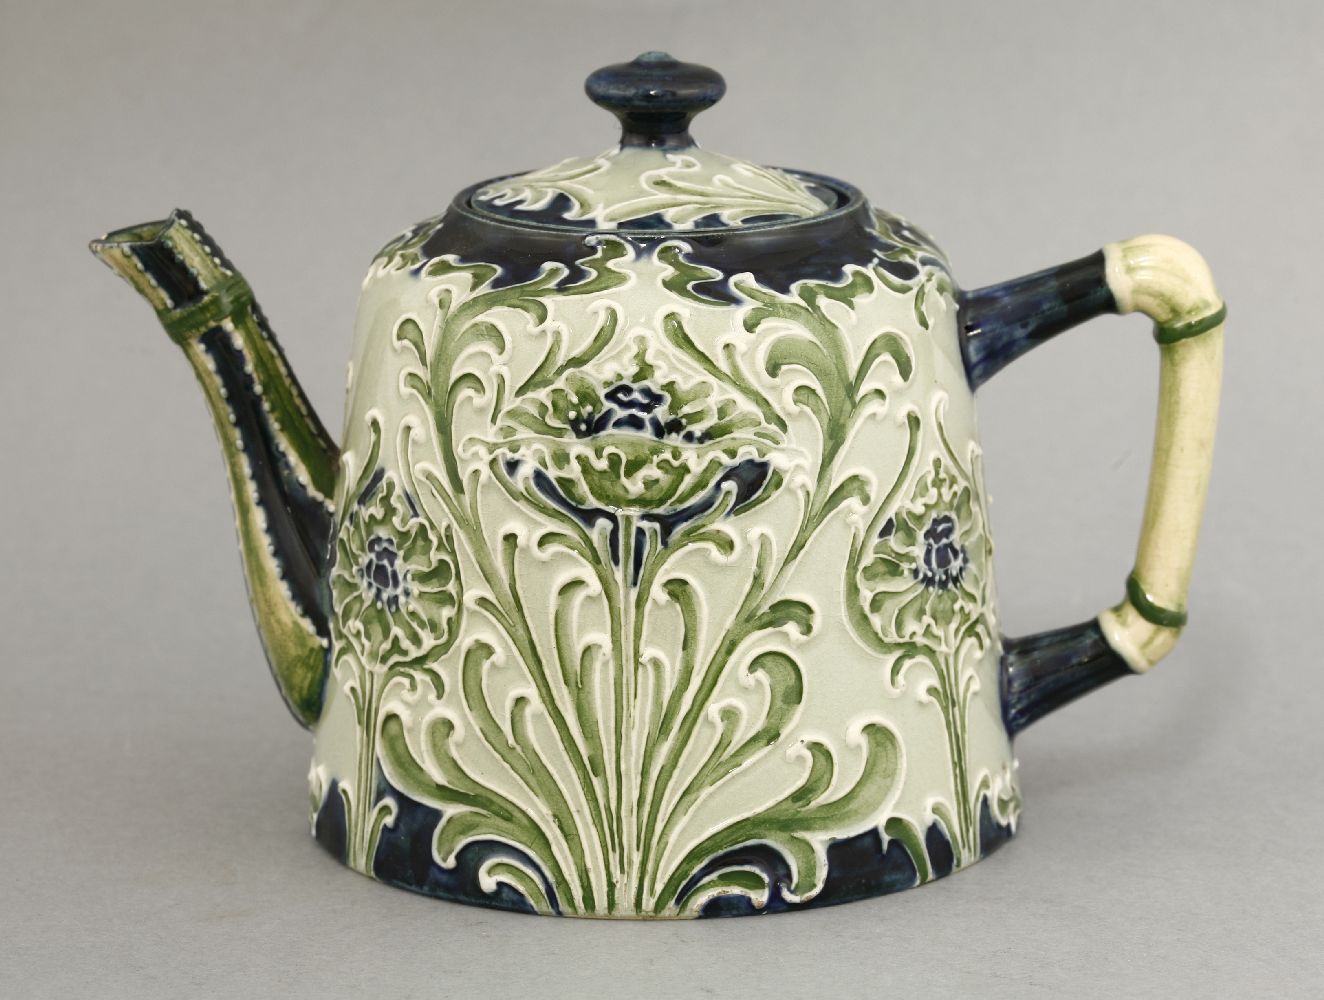 A MacIntryre 'Florianware' teapot,tube lined with flower heads in shades of green, blue and